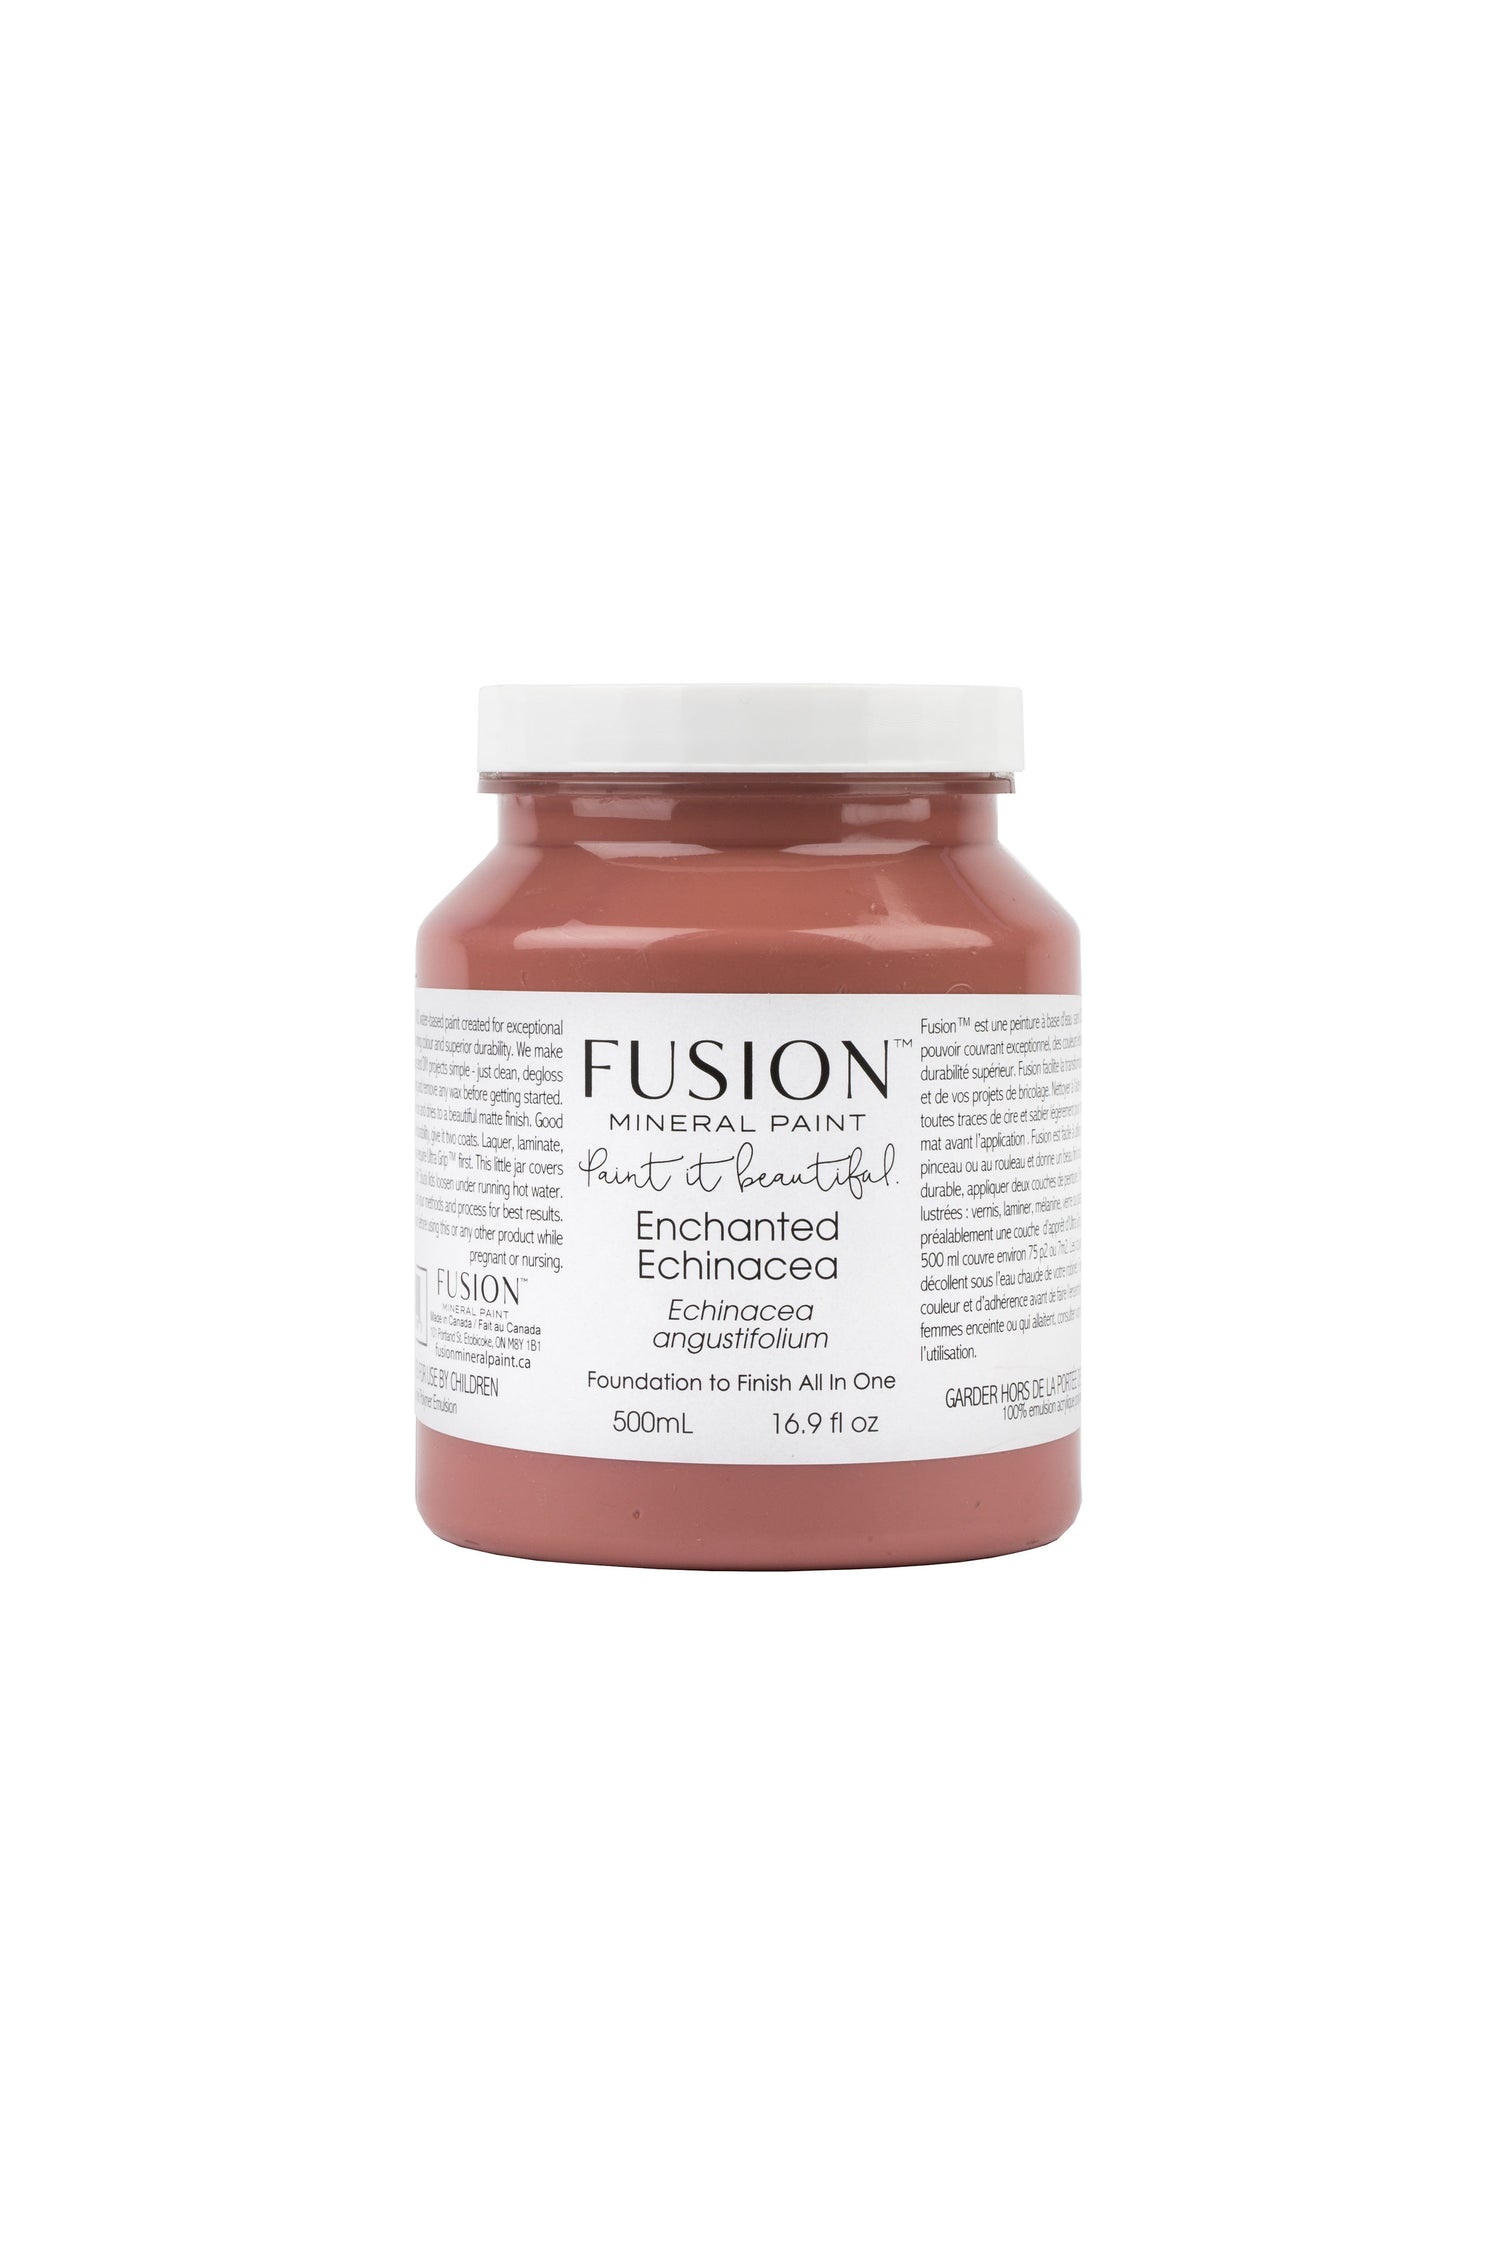 Enchanted Echinacea - Fusion Mineral Paint Paint > Fusion Mineral Paint > Furniture Paint 500ml